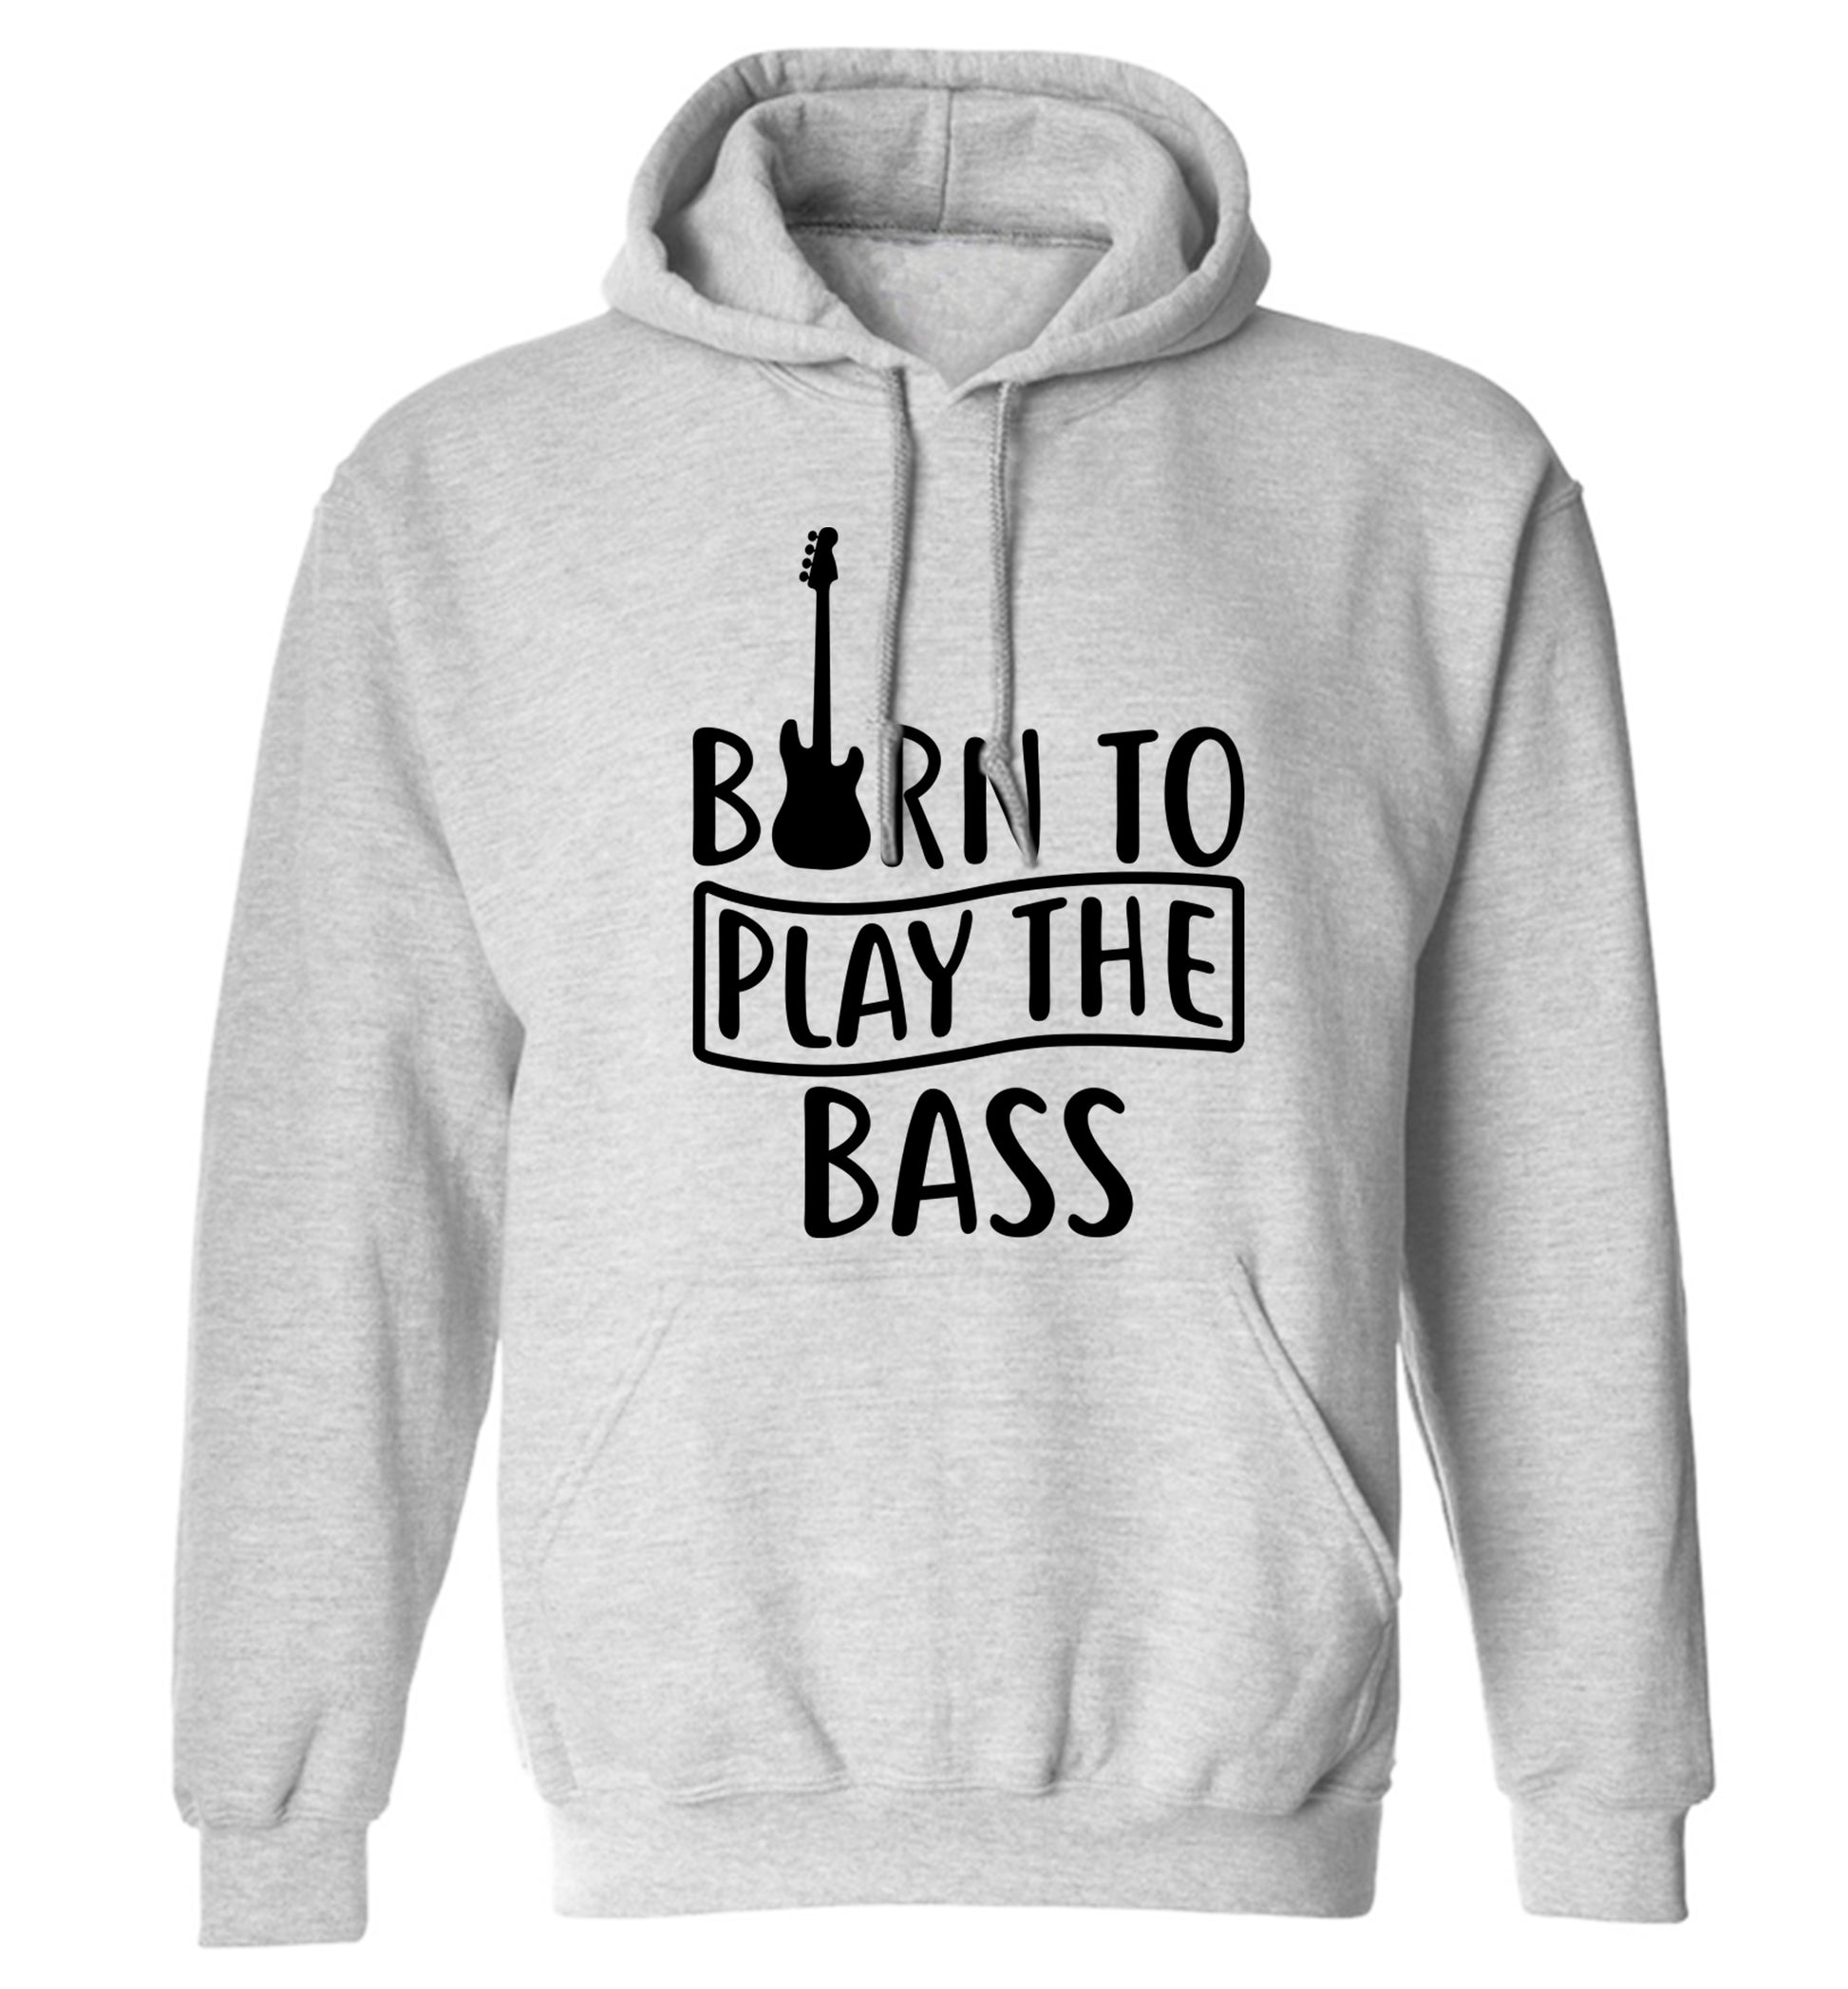 Born to play the bass adults unisex grey hoodie 2XL